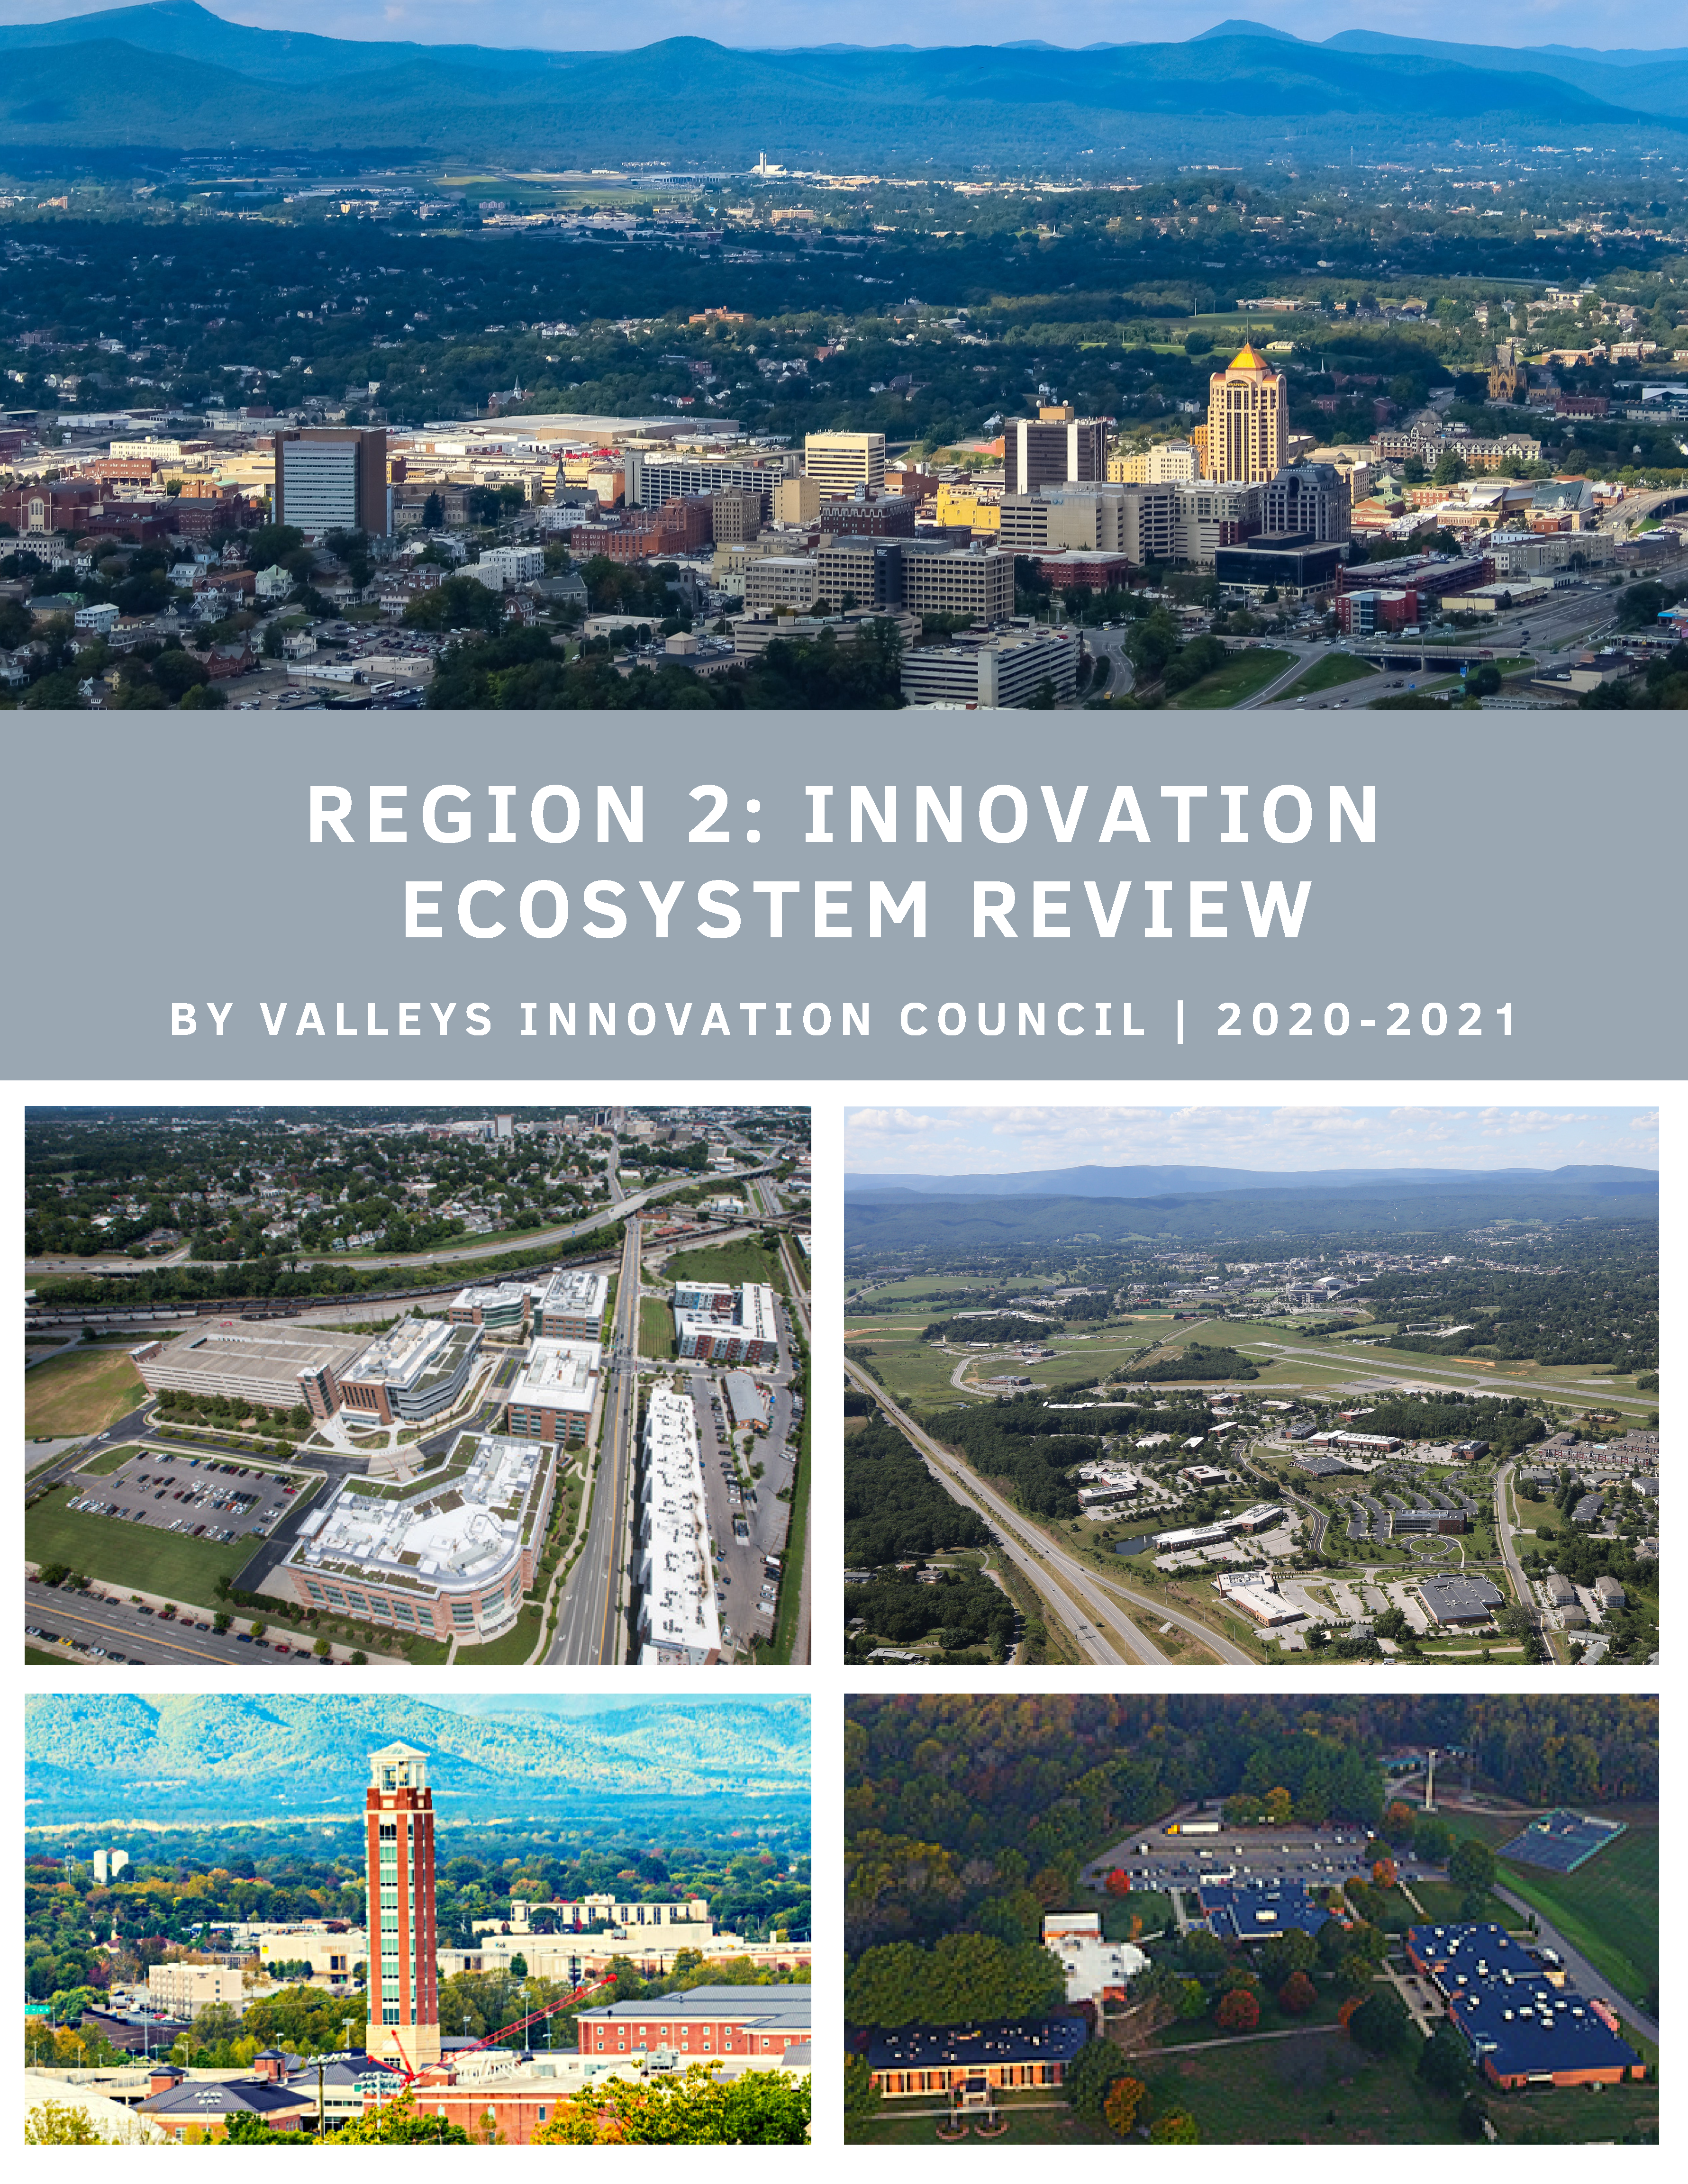 Learn more about the Region 2 Innovation Ecosystem in 2020-2021 with this report from Valleys Innovation Council.